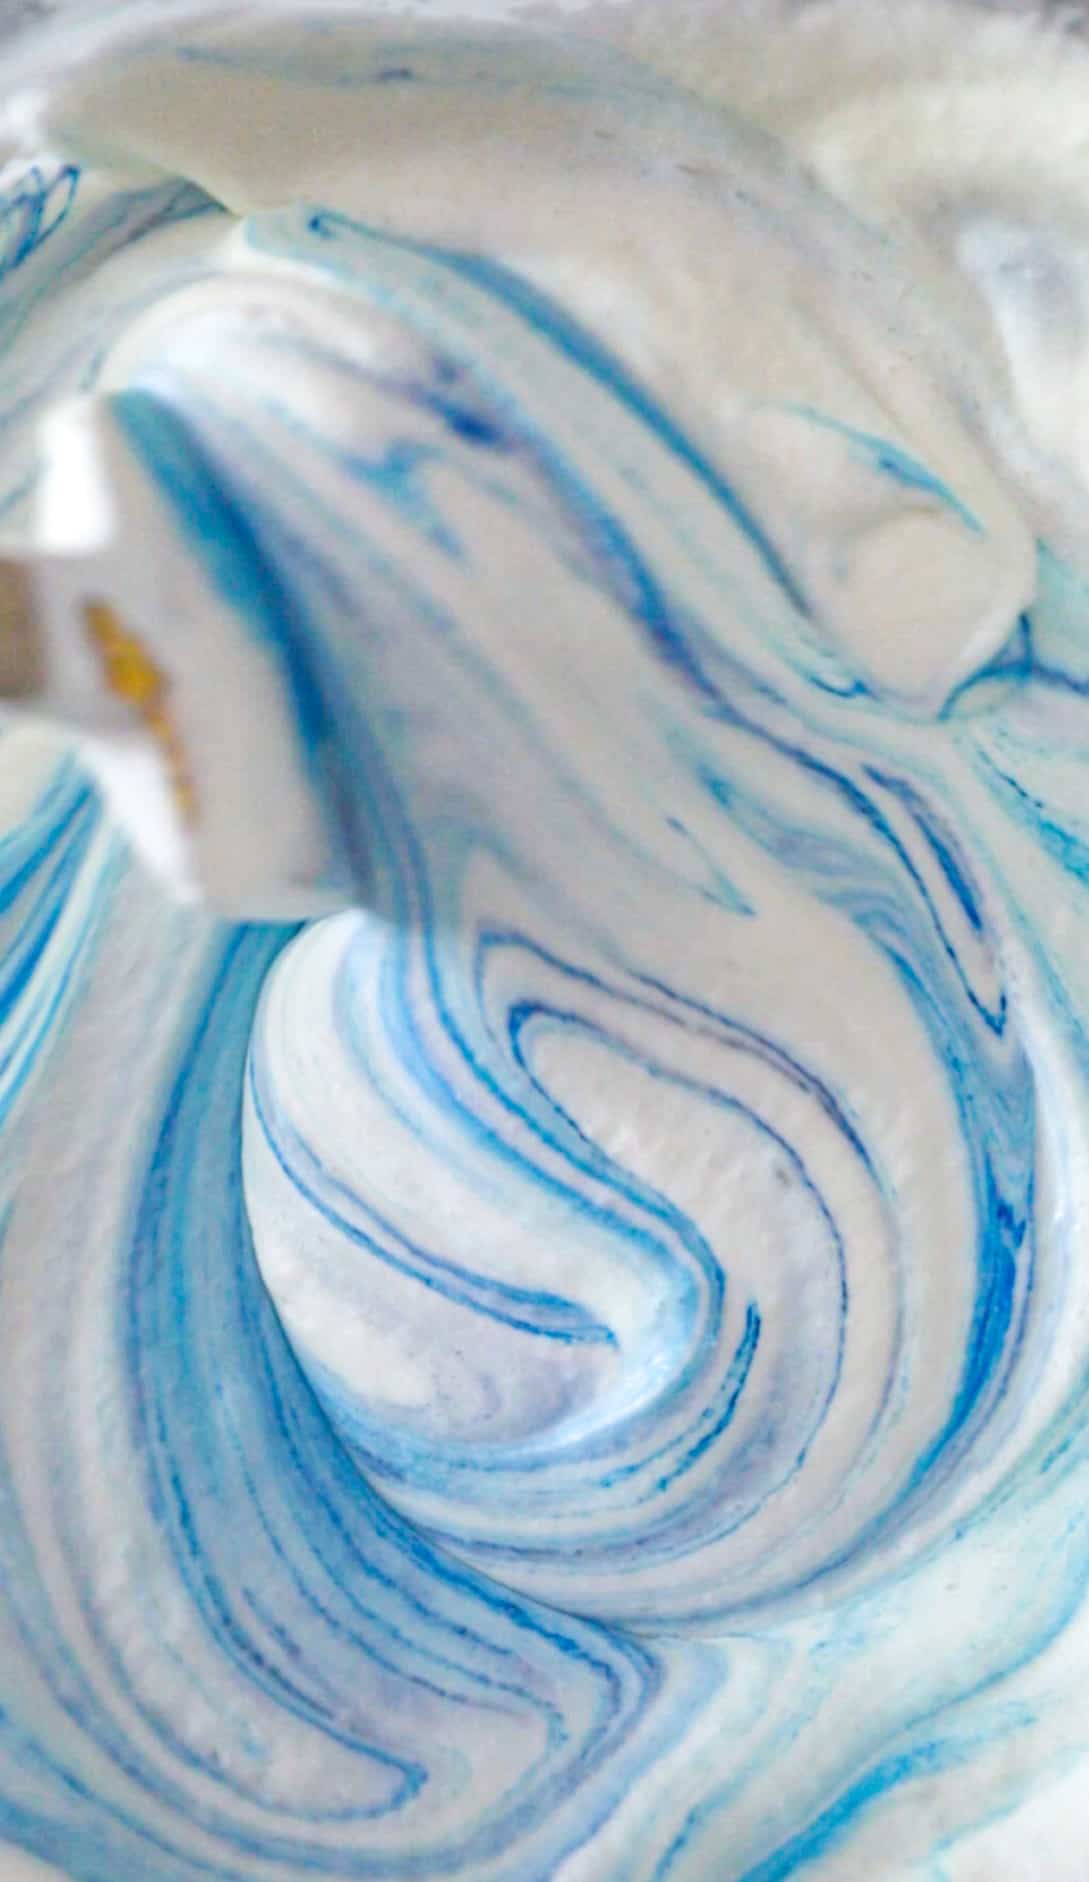 blue food coloring being added to the heavy whipping cream.